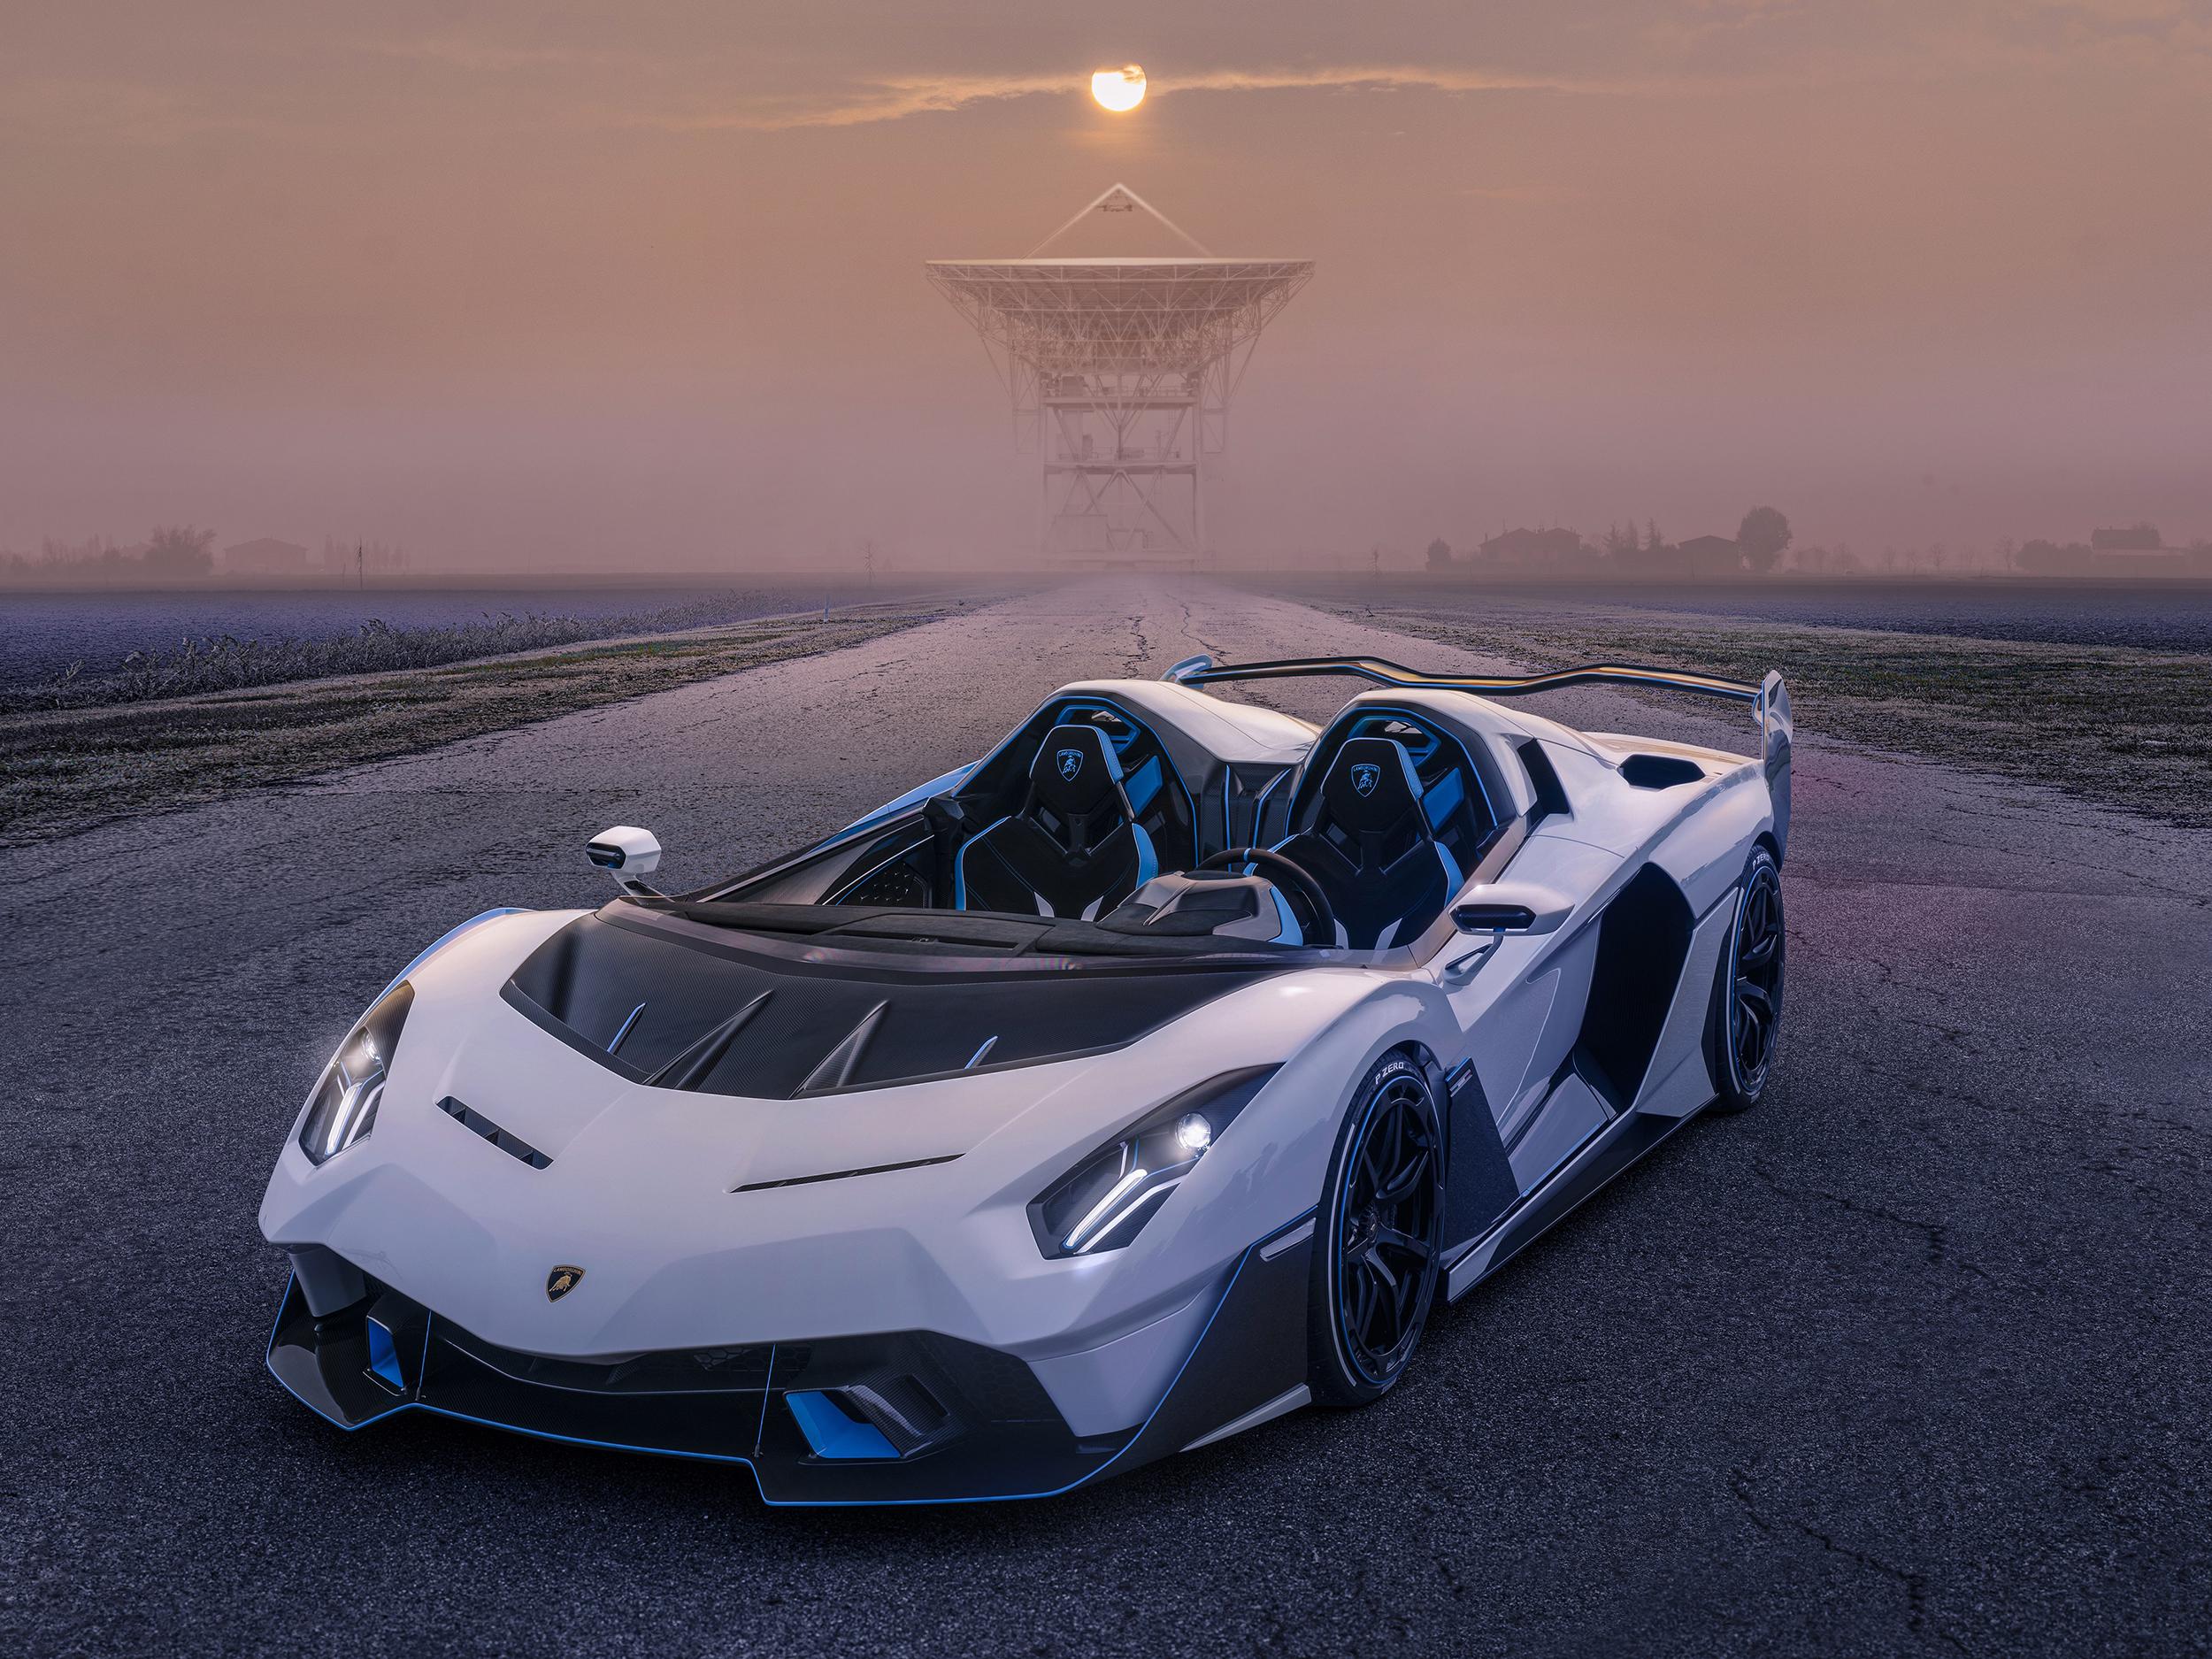 The new Lamborghini SC20 is an extreme open-top track car approved for road  use - Your Test Driver